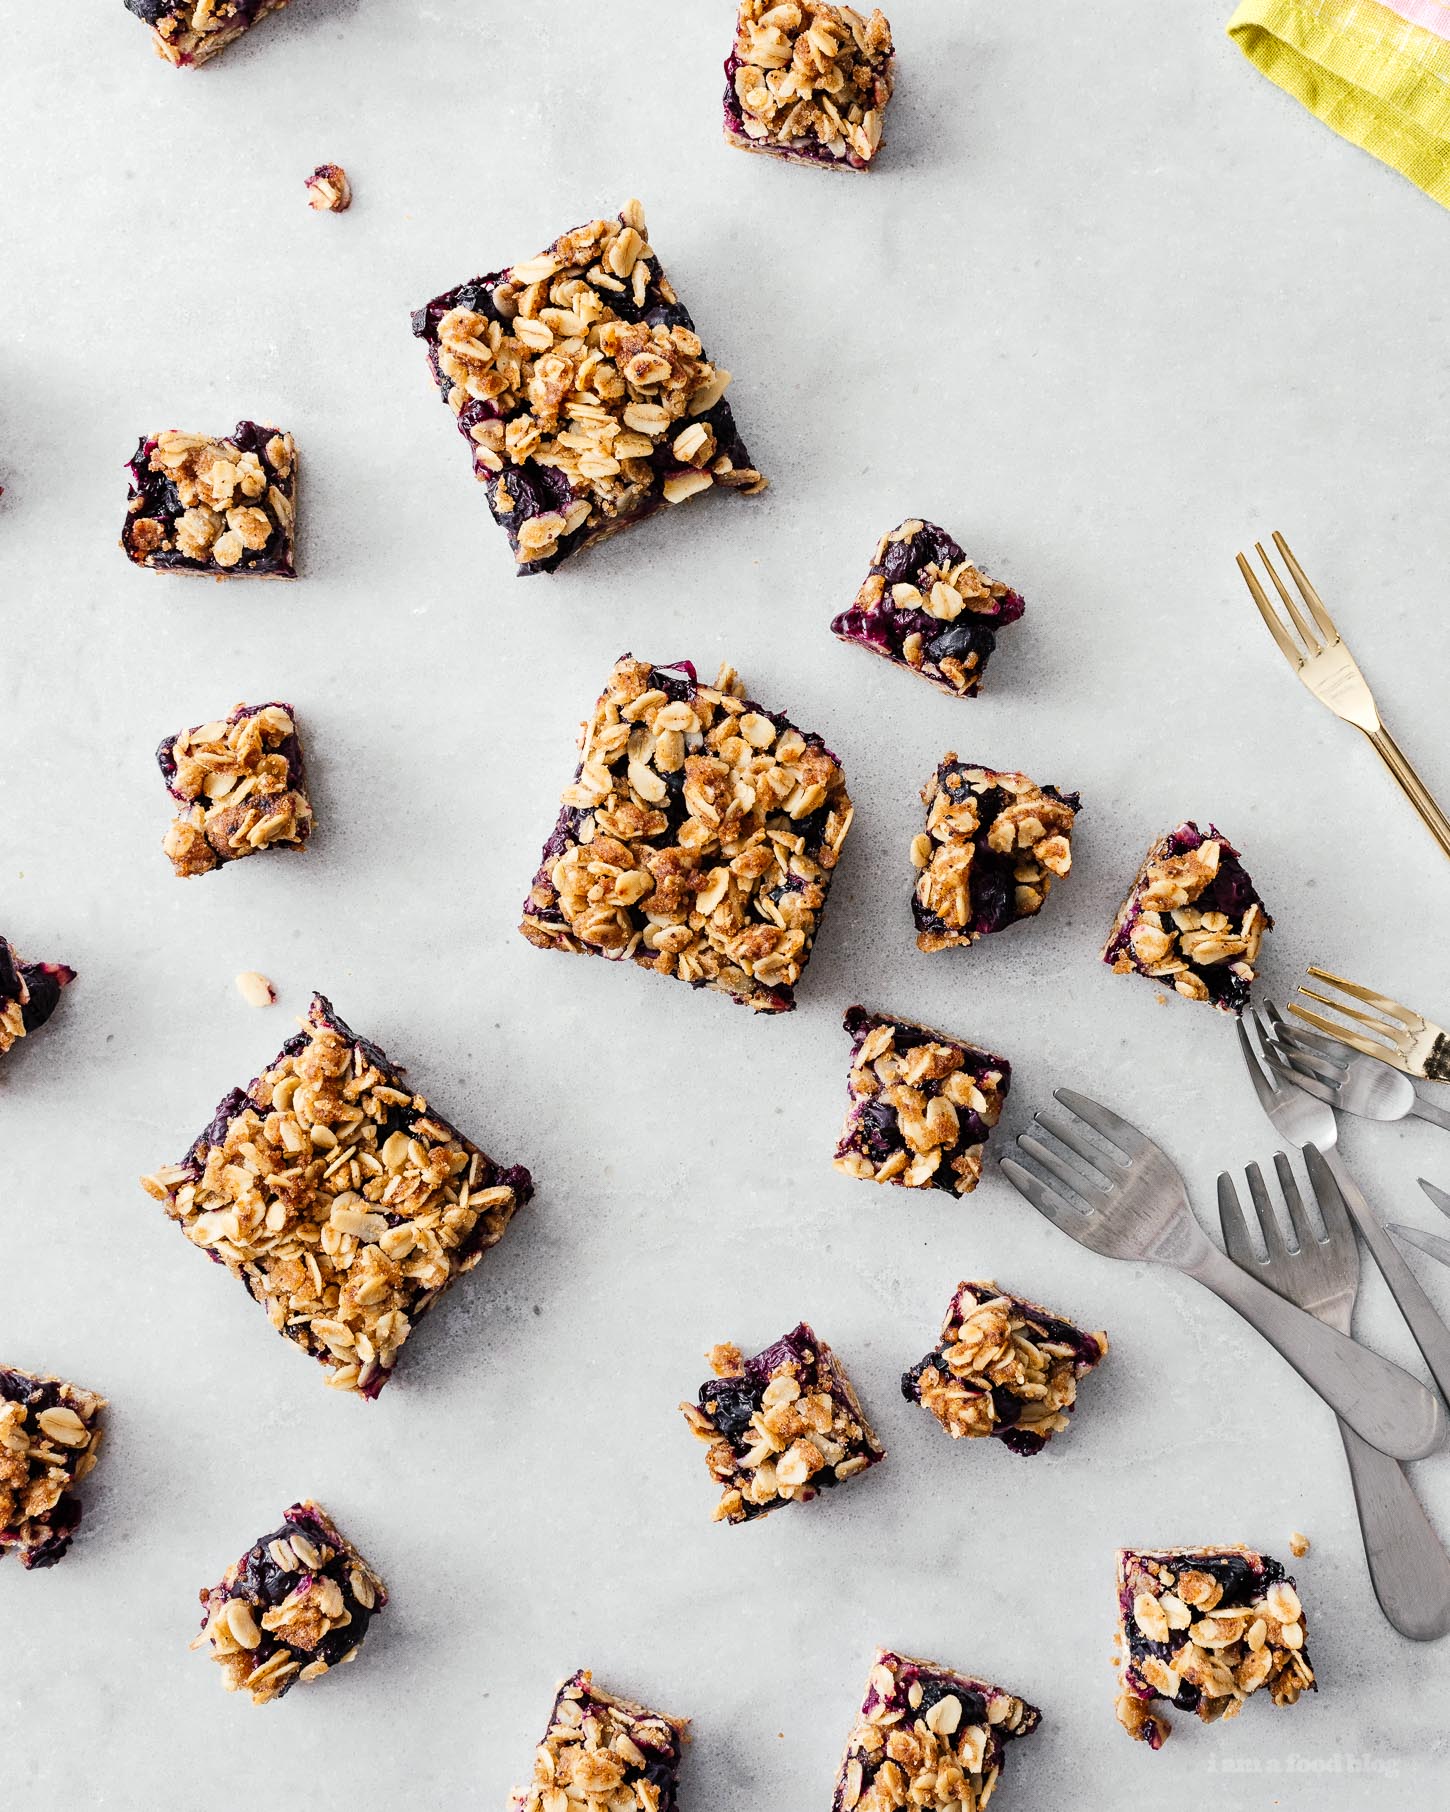 These browned butter blueberry oatmeal crumble bars are bursting with all the goodness of sweet summertime blueberries, nutty browned butter, and heart healthy oats. Make a batch today! #brownedbutter #brownbutter #recipes #dessert #oatbars #blueberrybars #blueberries #oatmeal